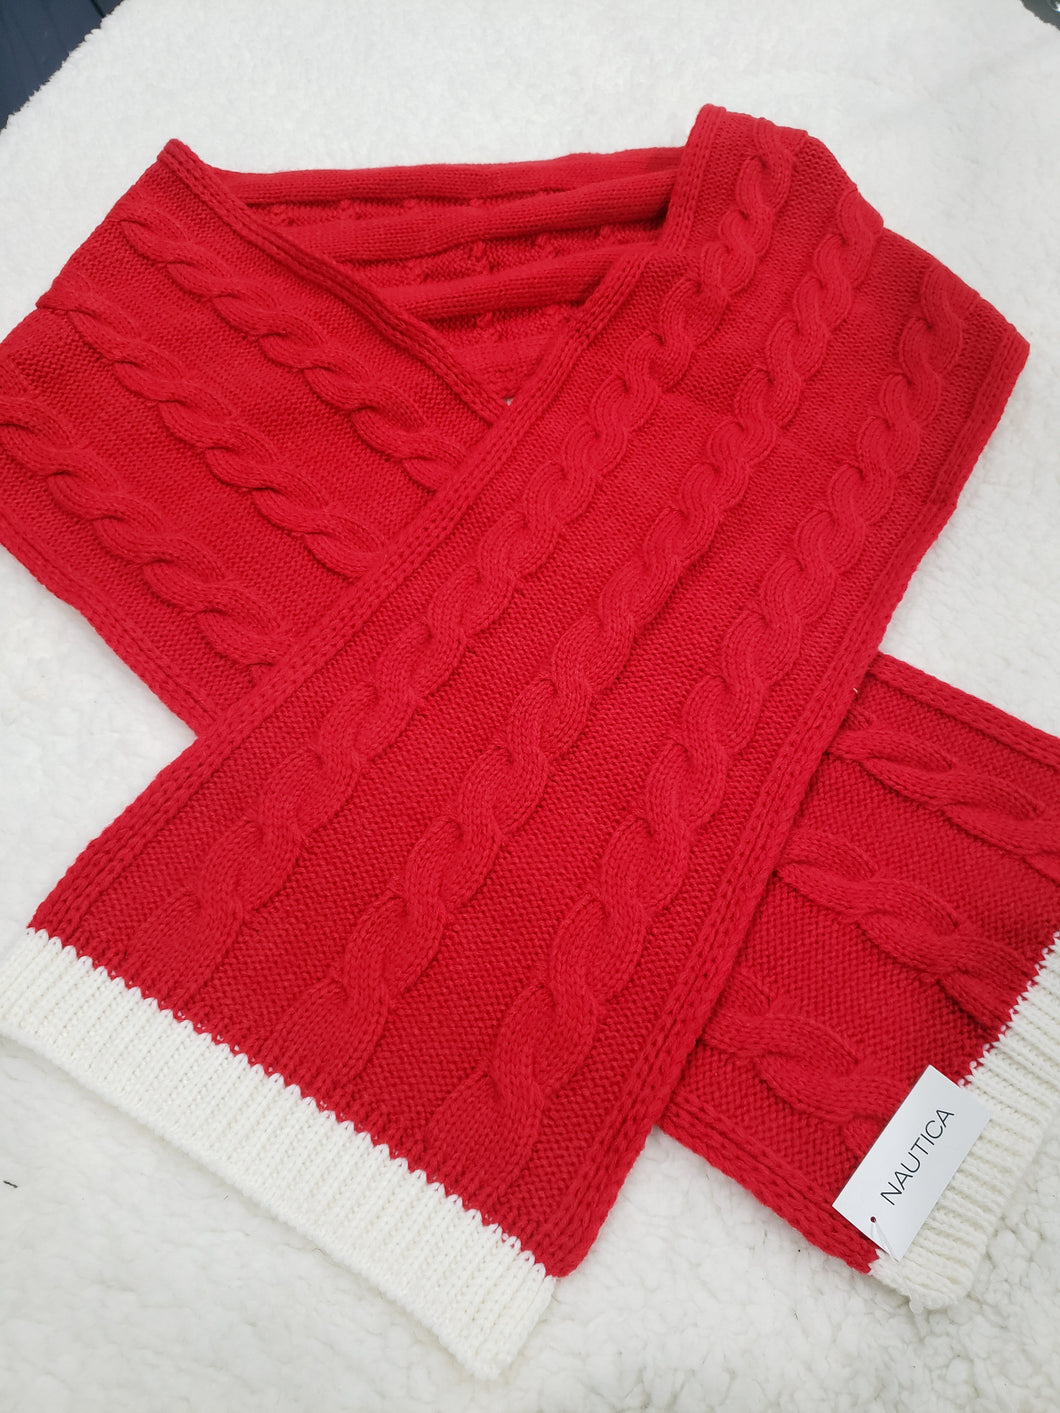 Nautica scarf authentic Red and White